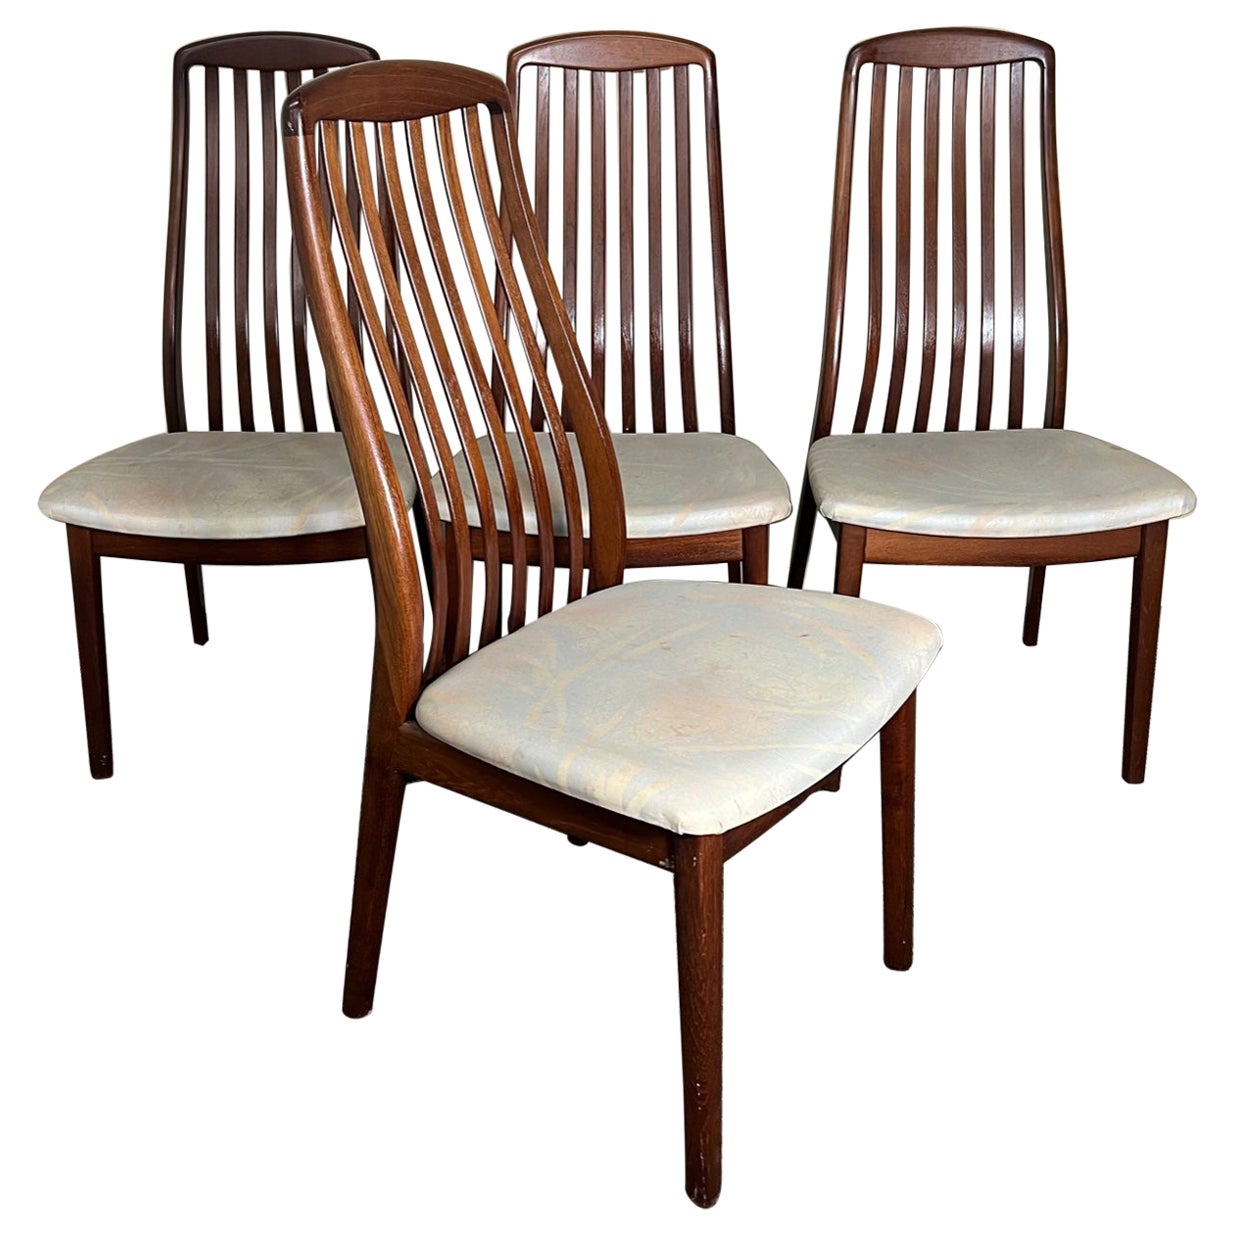 4 Danish Mid Century Modern Dining Chairs by Schou Andersen Slat Back Mahogany For Sale